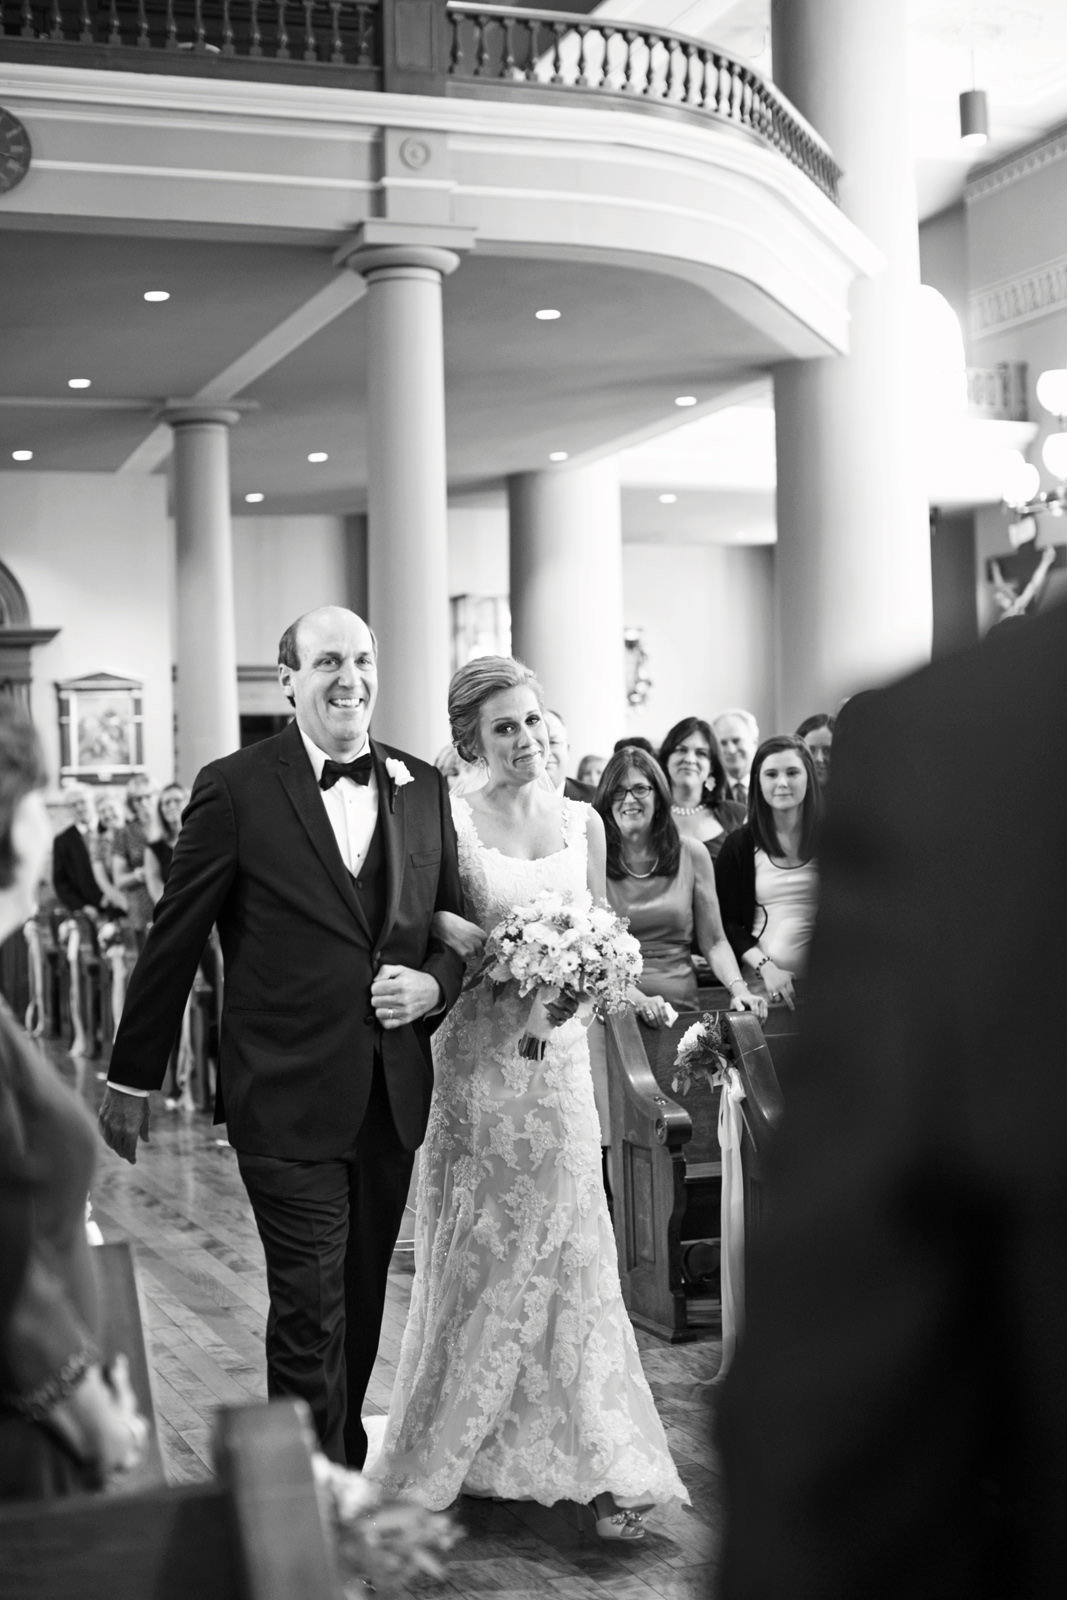 L_Photographie_wedding_wedding_ceremony_old_cathedral_reception_chase_park_plaza_st_15